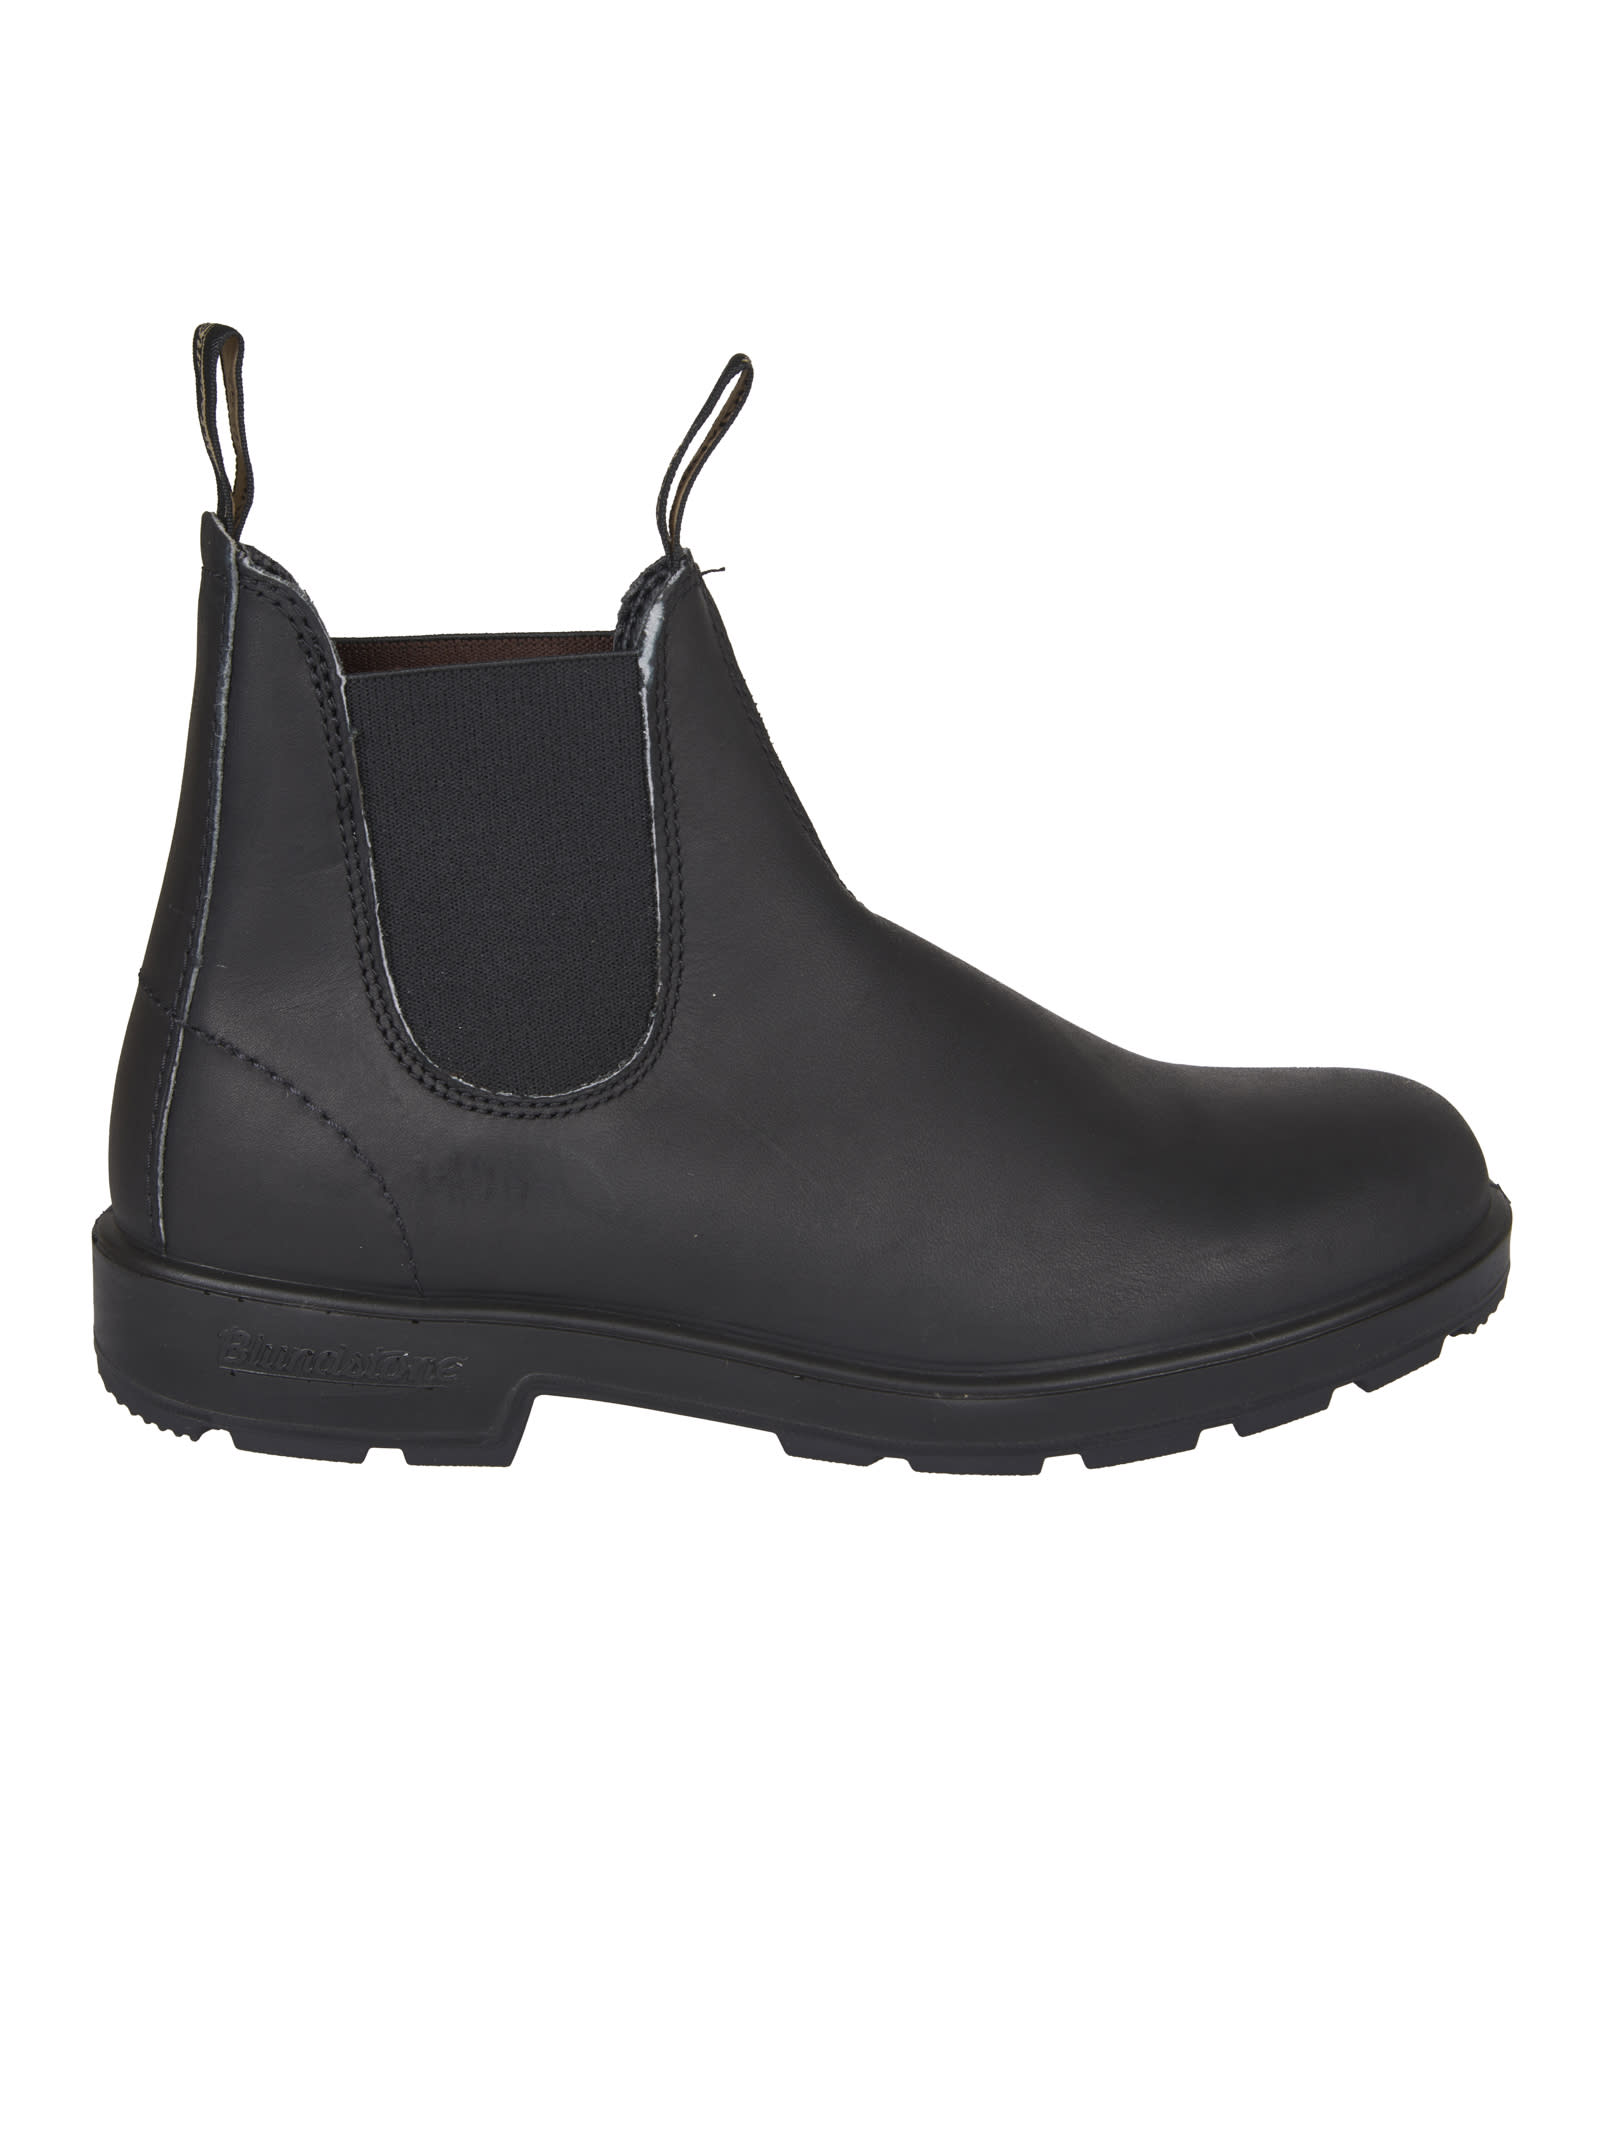 Blundstone Black 510 Ankle Boots